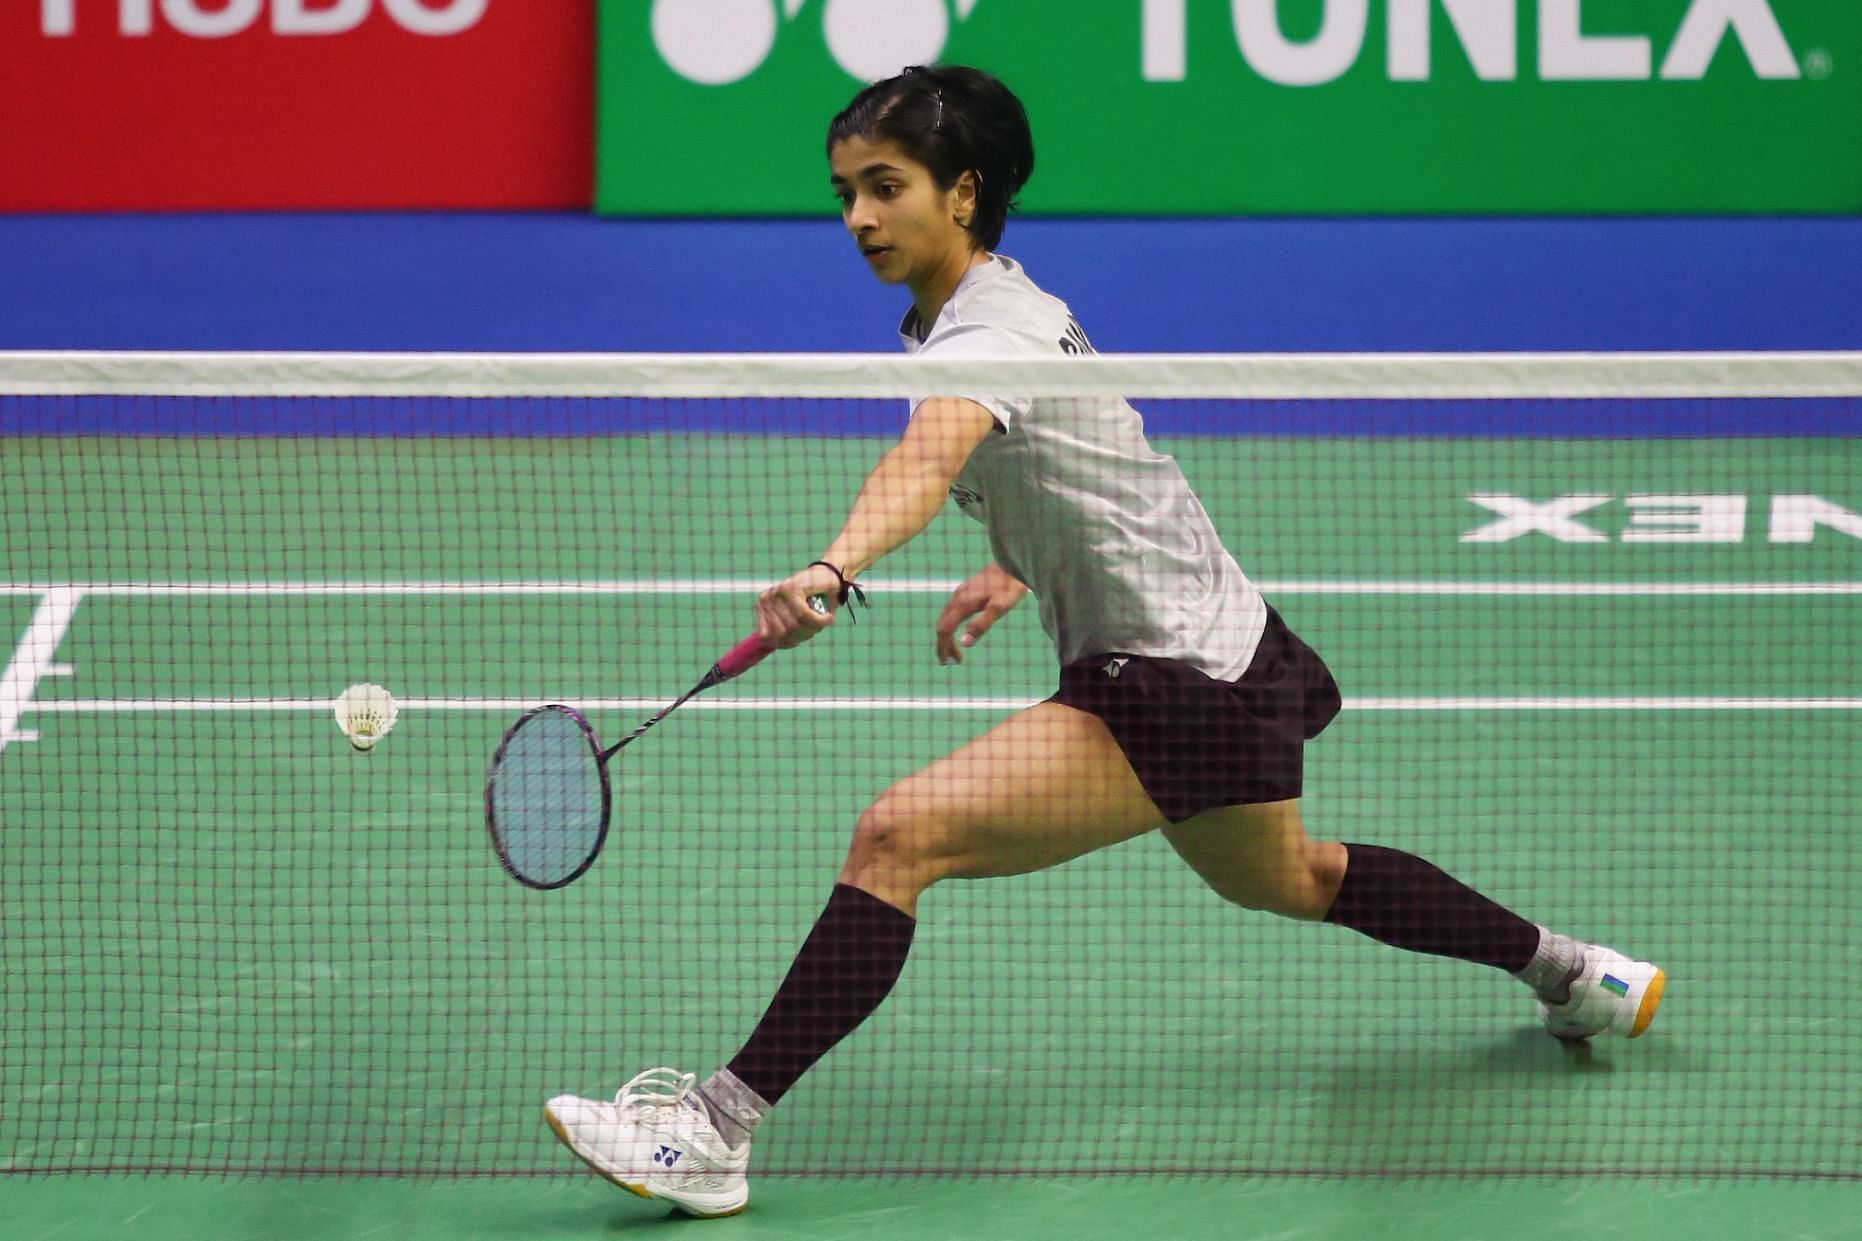 World No. 48 Malvika Bansod of Nagpur will be eager to play the first International Challenge Badminton tournament in the Orange City from September 13-18. (Pic credits: BAI)